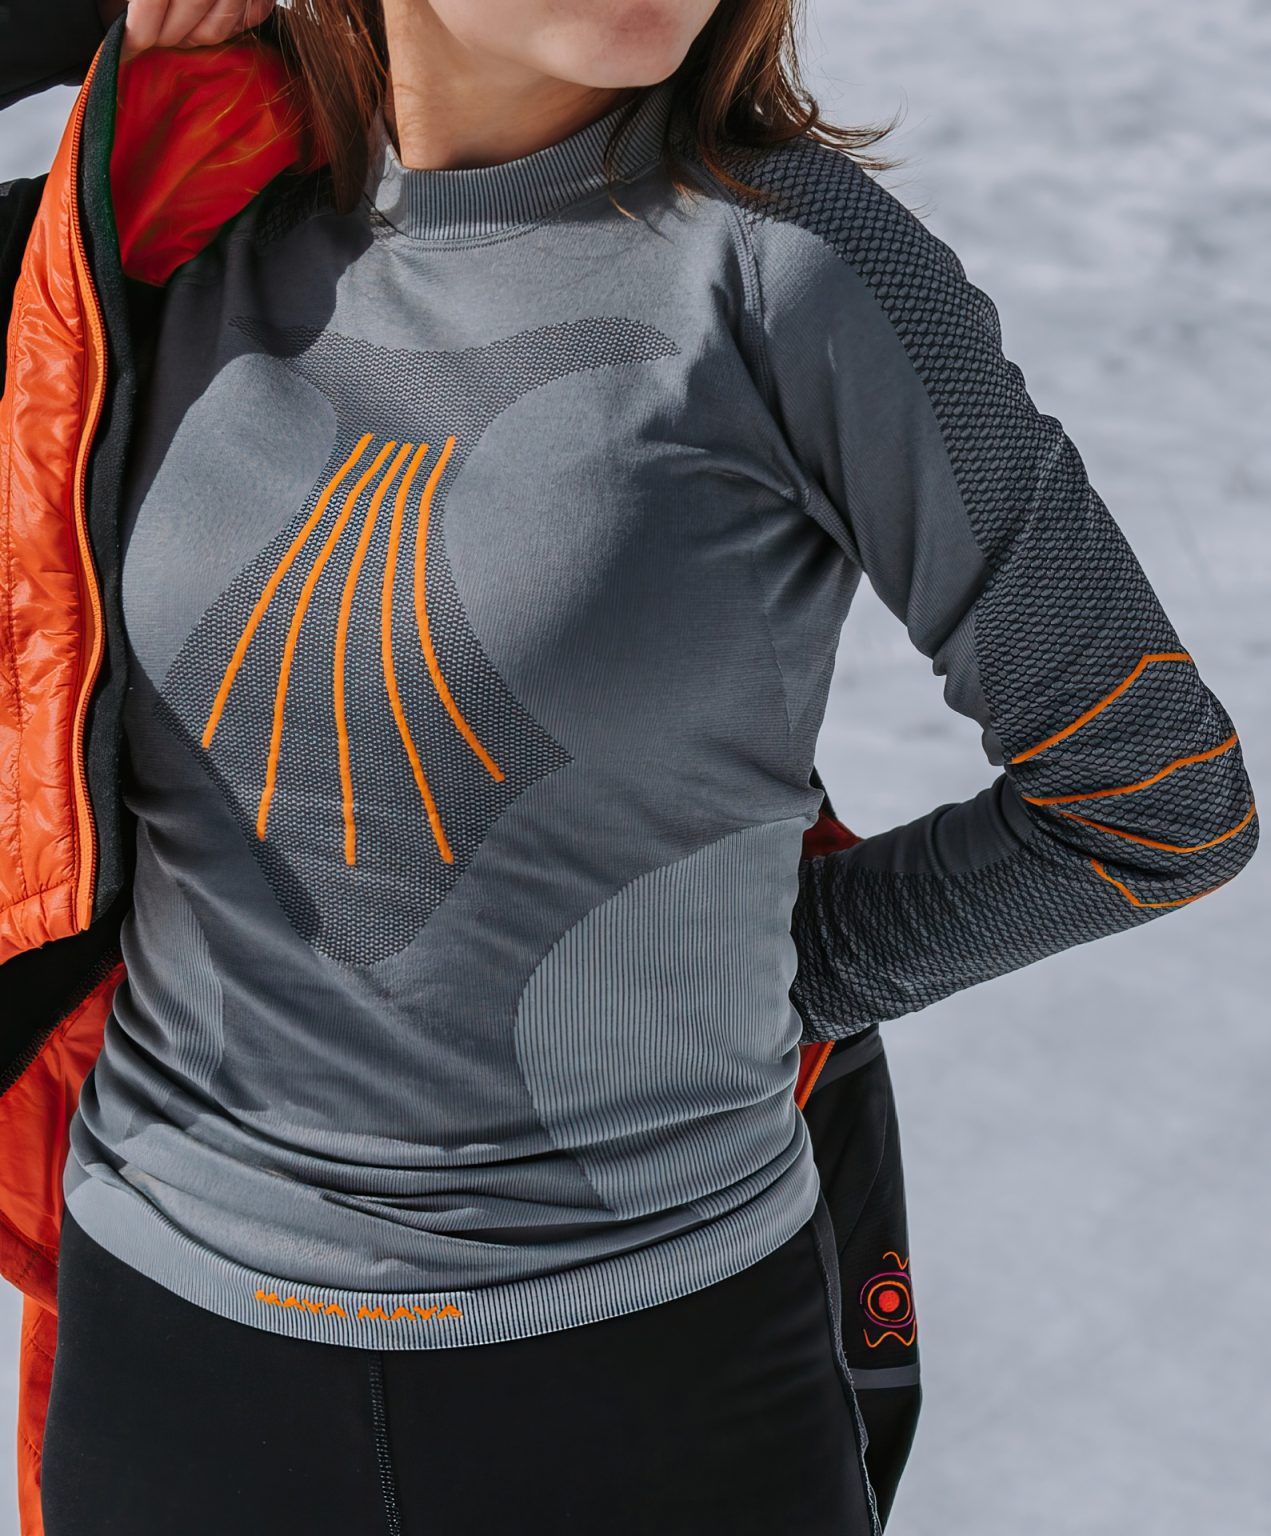 Sway shirt is long sleeve functional underwear from MAYA MAYA for women for outdoor activities